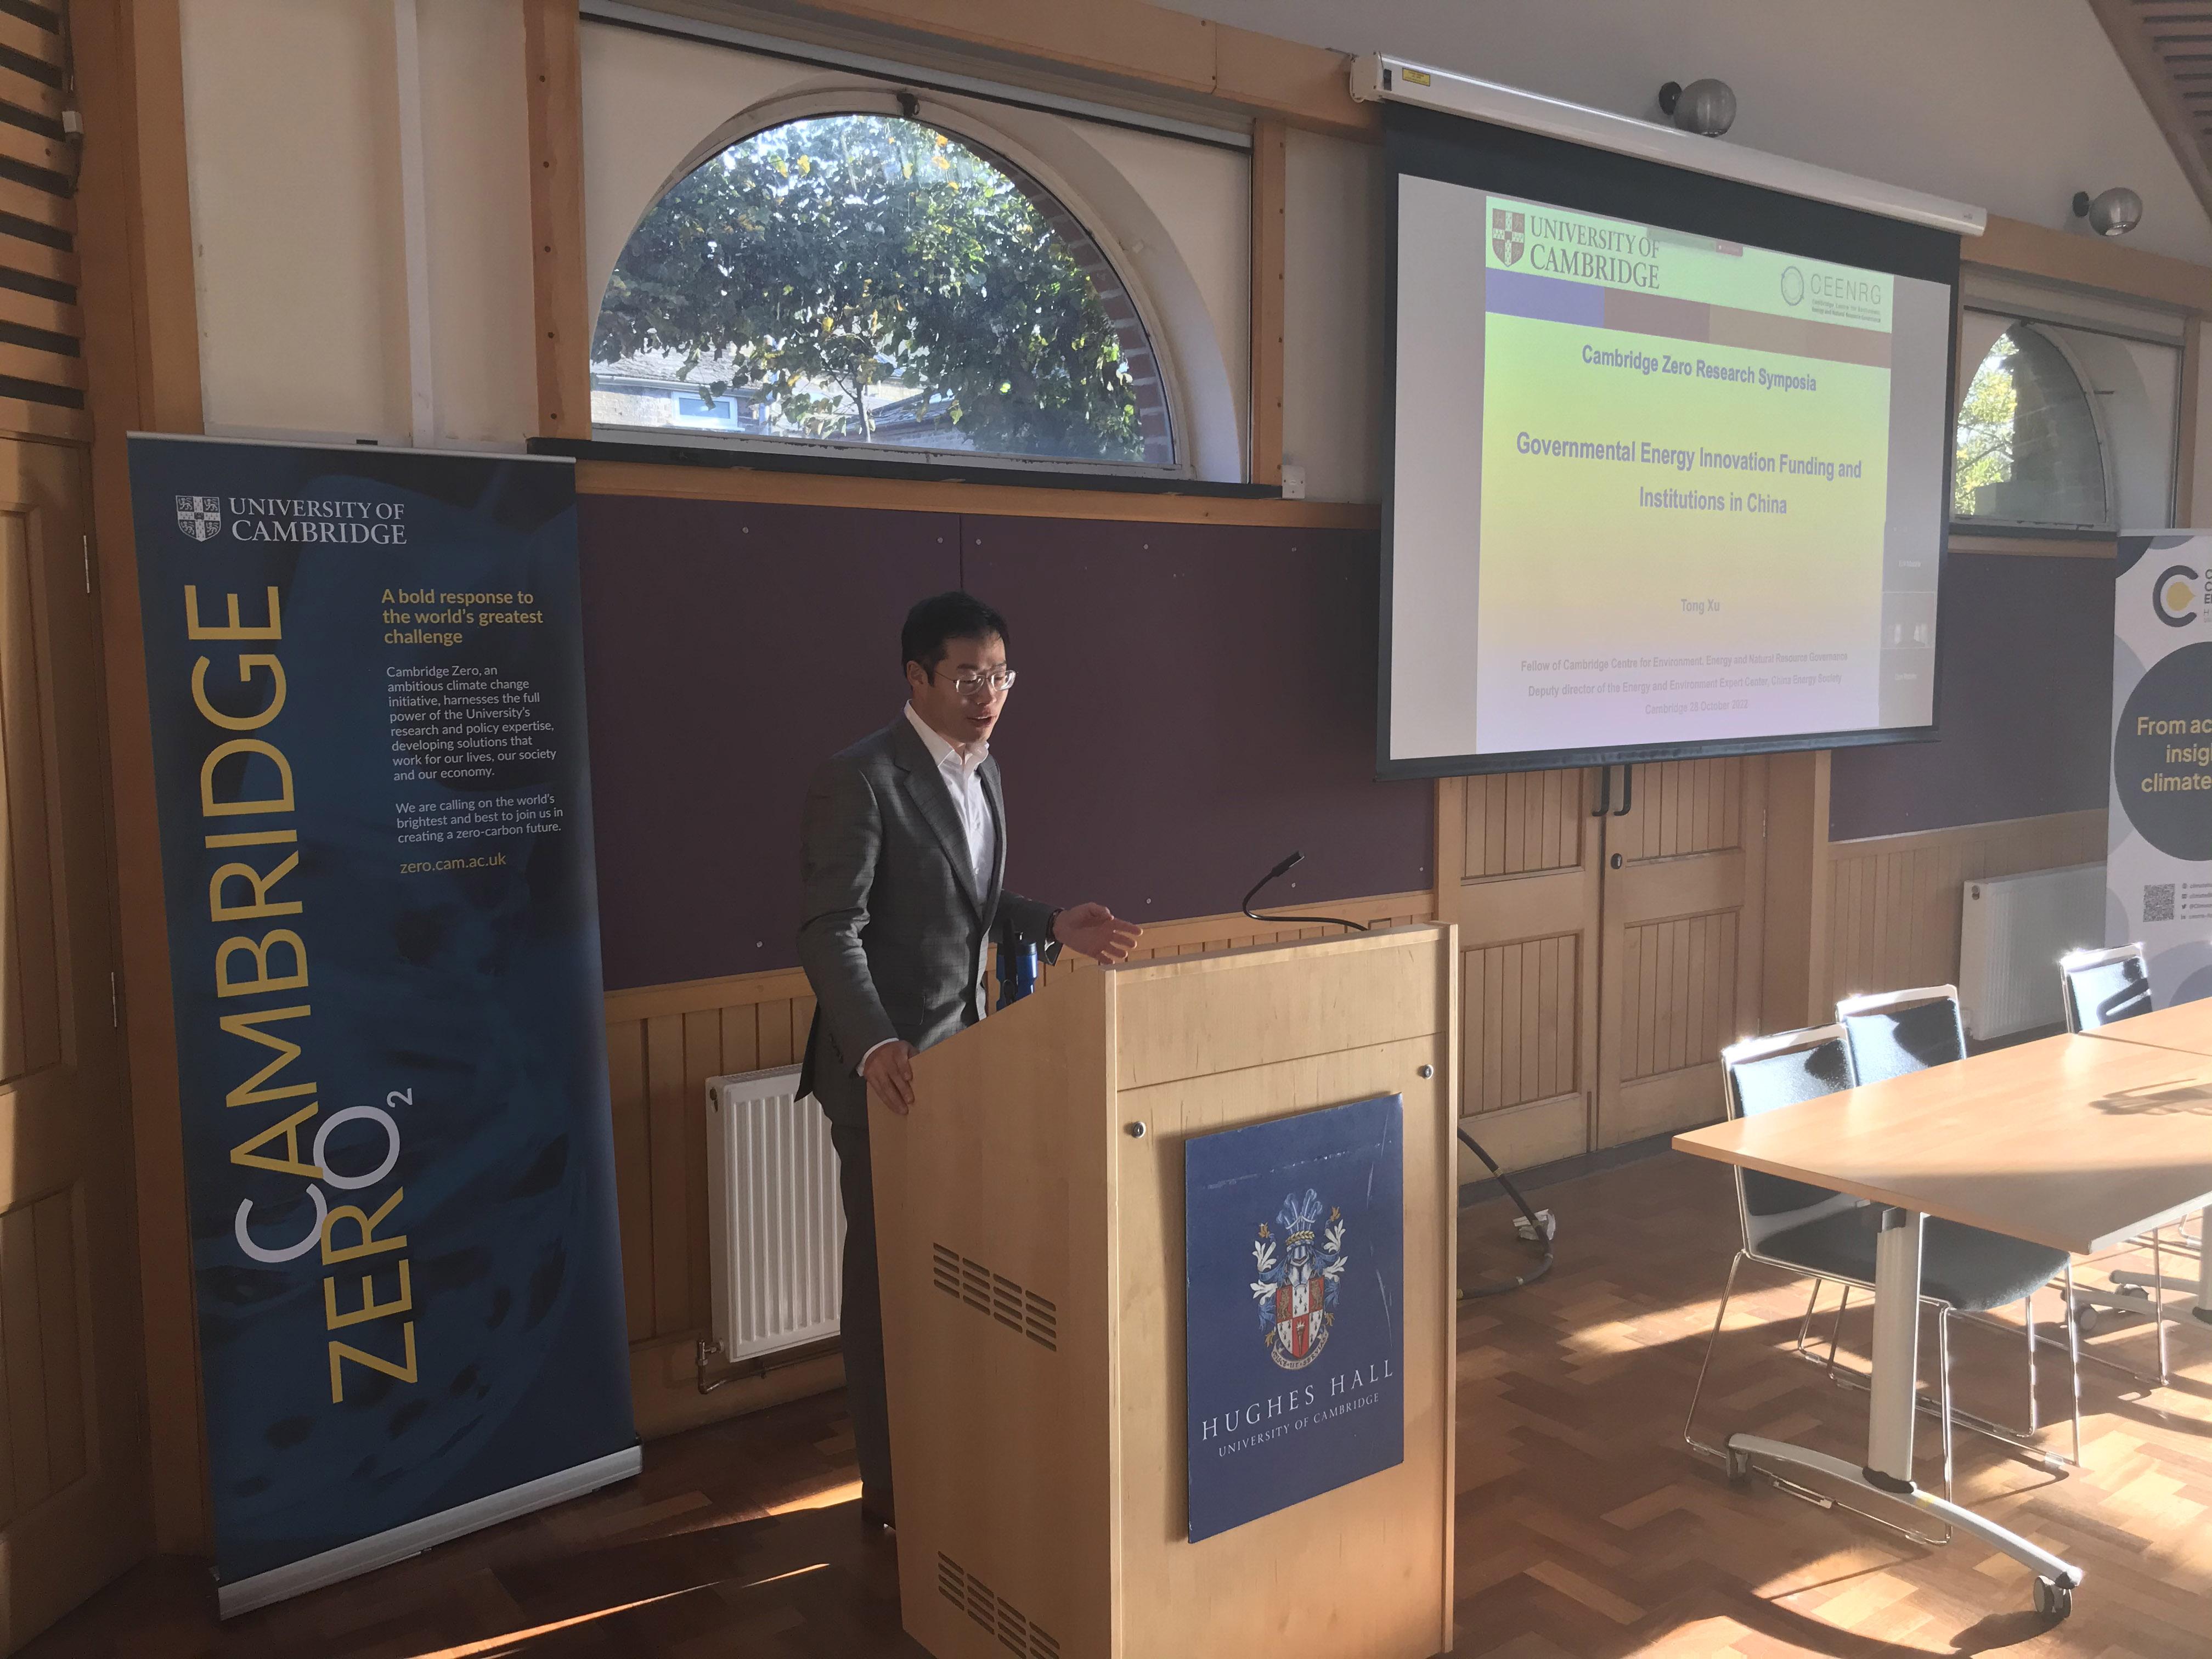 Dr Tong Xu CEENRG, Fellow, Cambridge Centre for Environment, Energy and Natural Resource Governance (C-EENRG), Department of Land Economy outlined 'Governmental energy innovation funding and institutions in China'